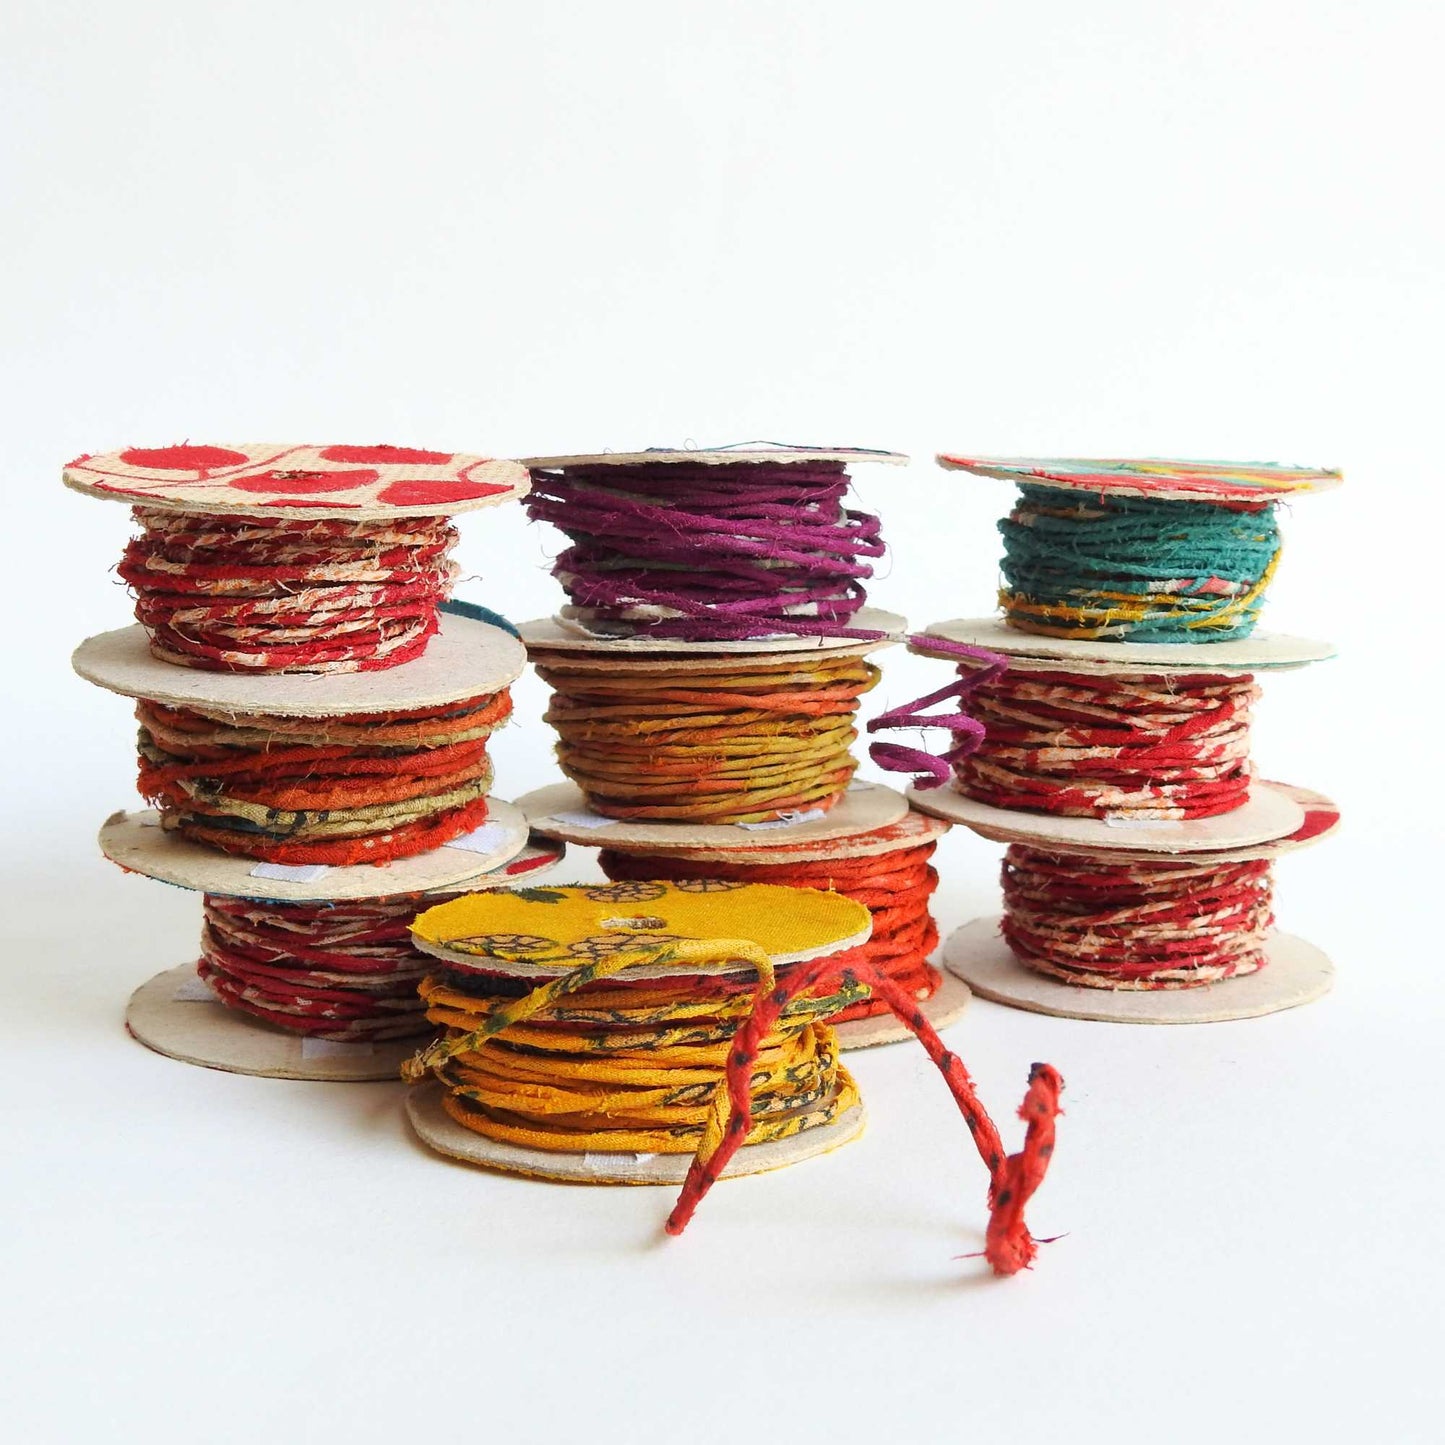 Reels of fairtrade craft wire for beading, craft, amigumuri, flowers, headbands, jewelry. Cloth covered flexible wire. Handmade using upcycled cotton saris. 